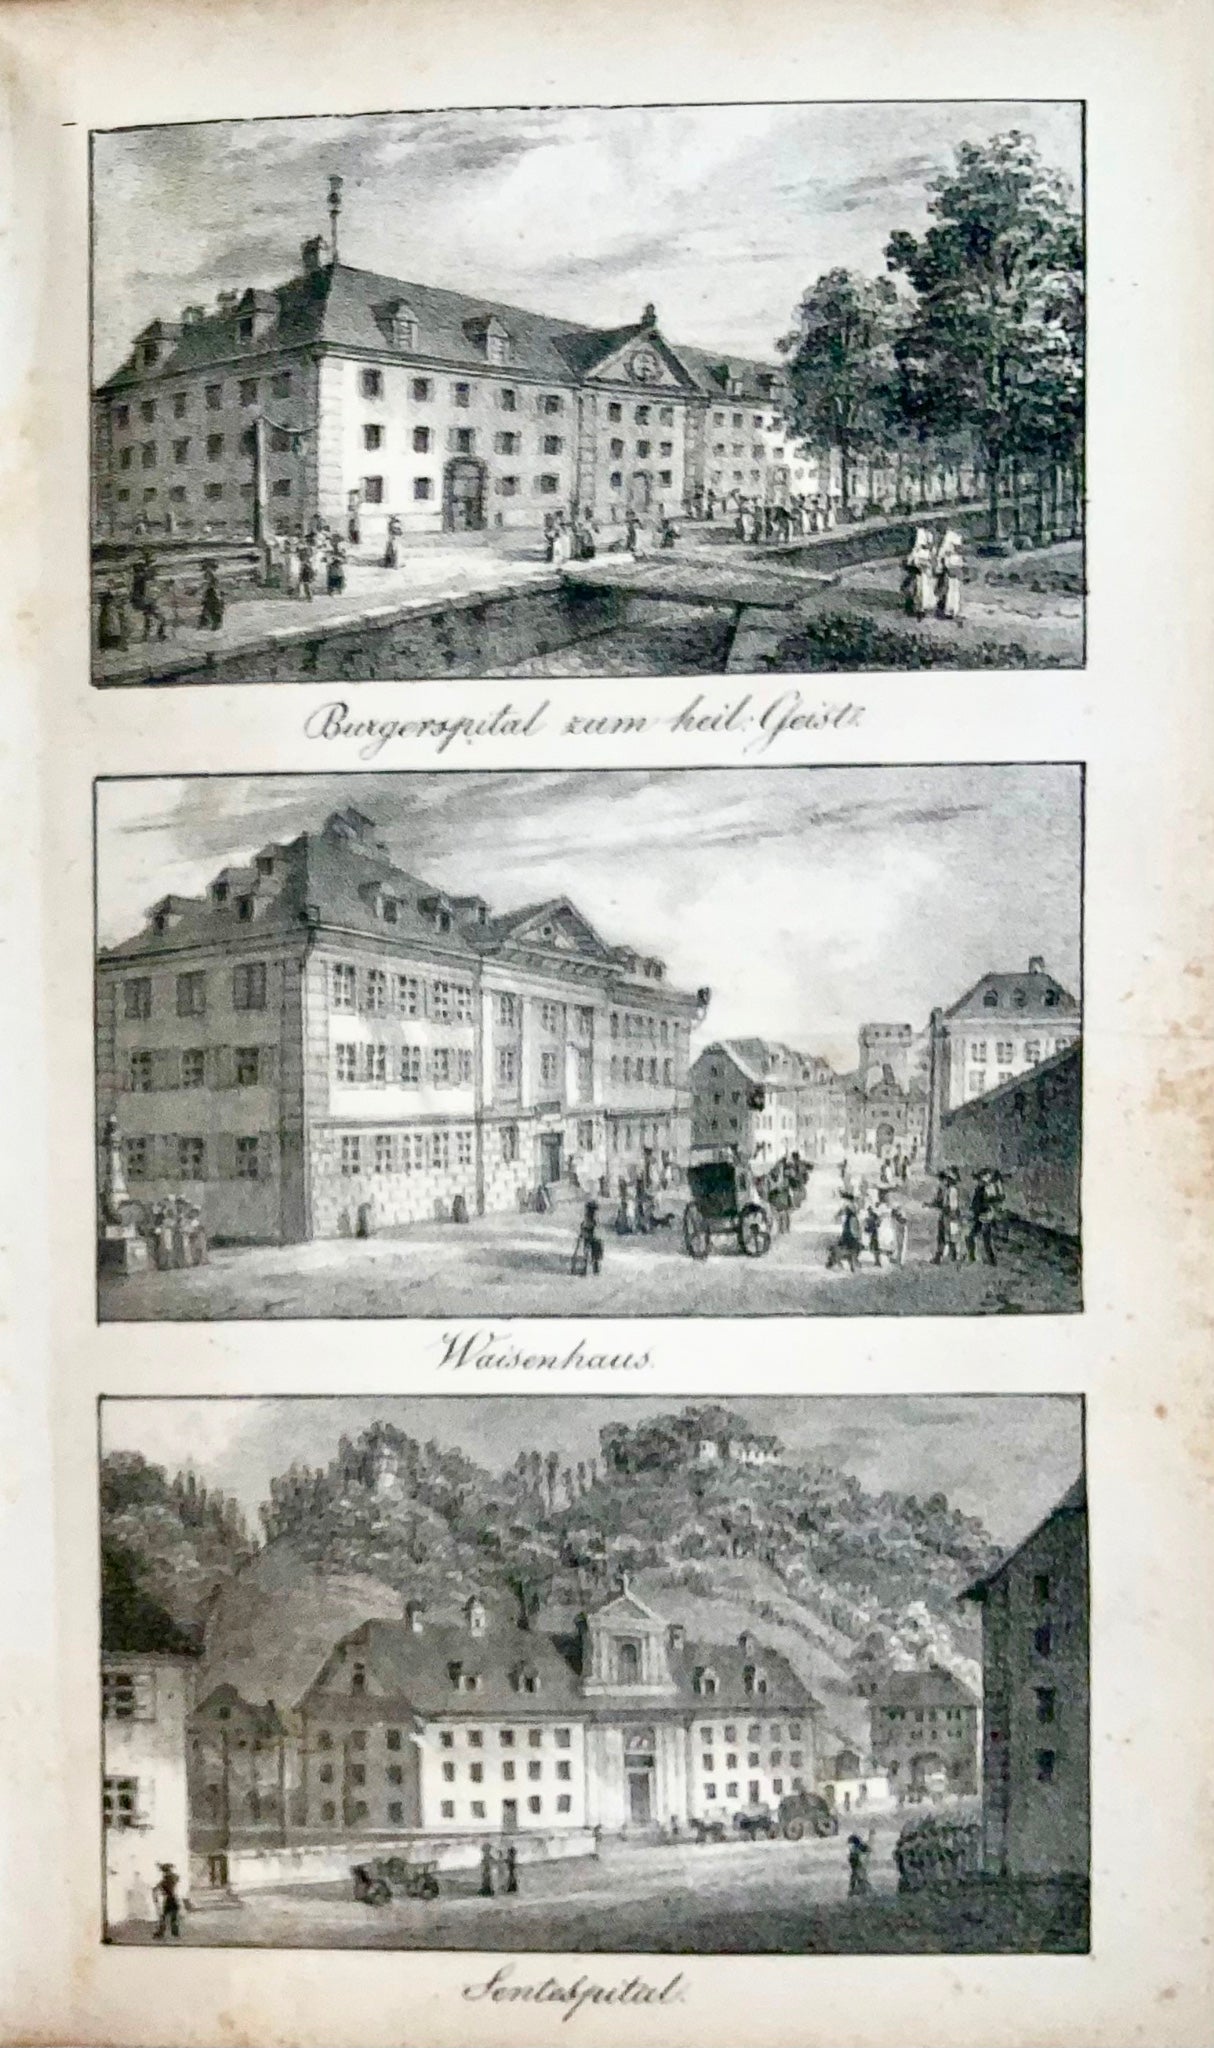 1832 Lucerne, Businger, 1 lithograph panorama, 9 vignettes, map, Swiss travel guide